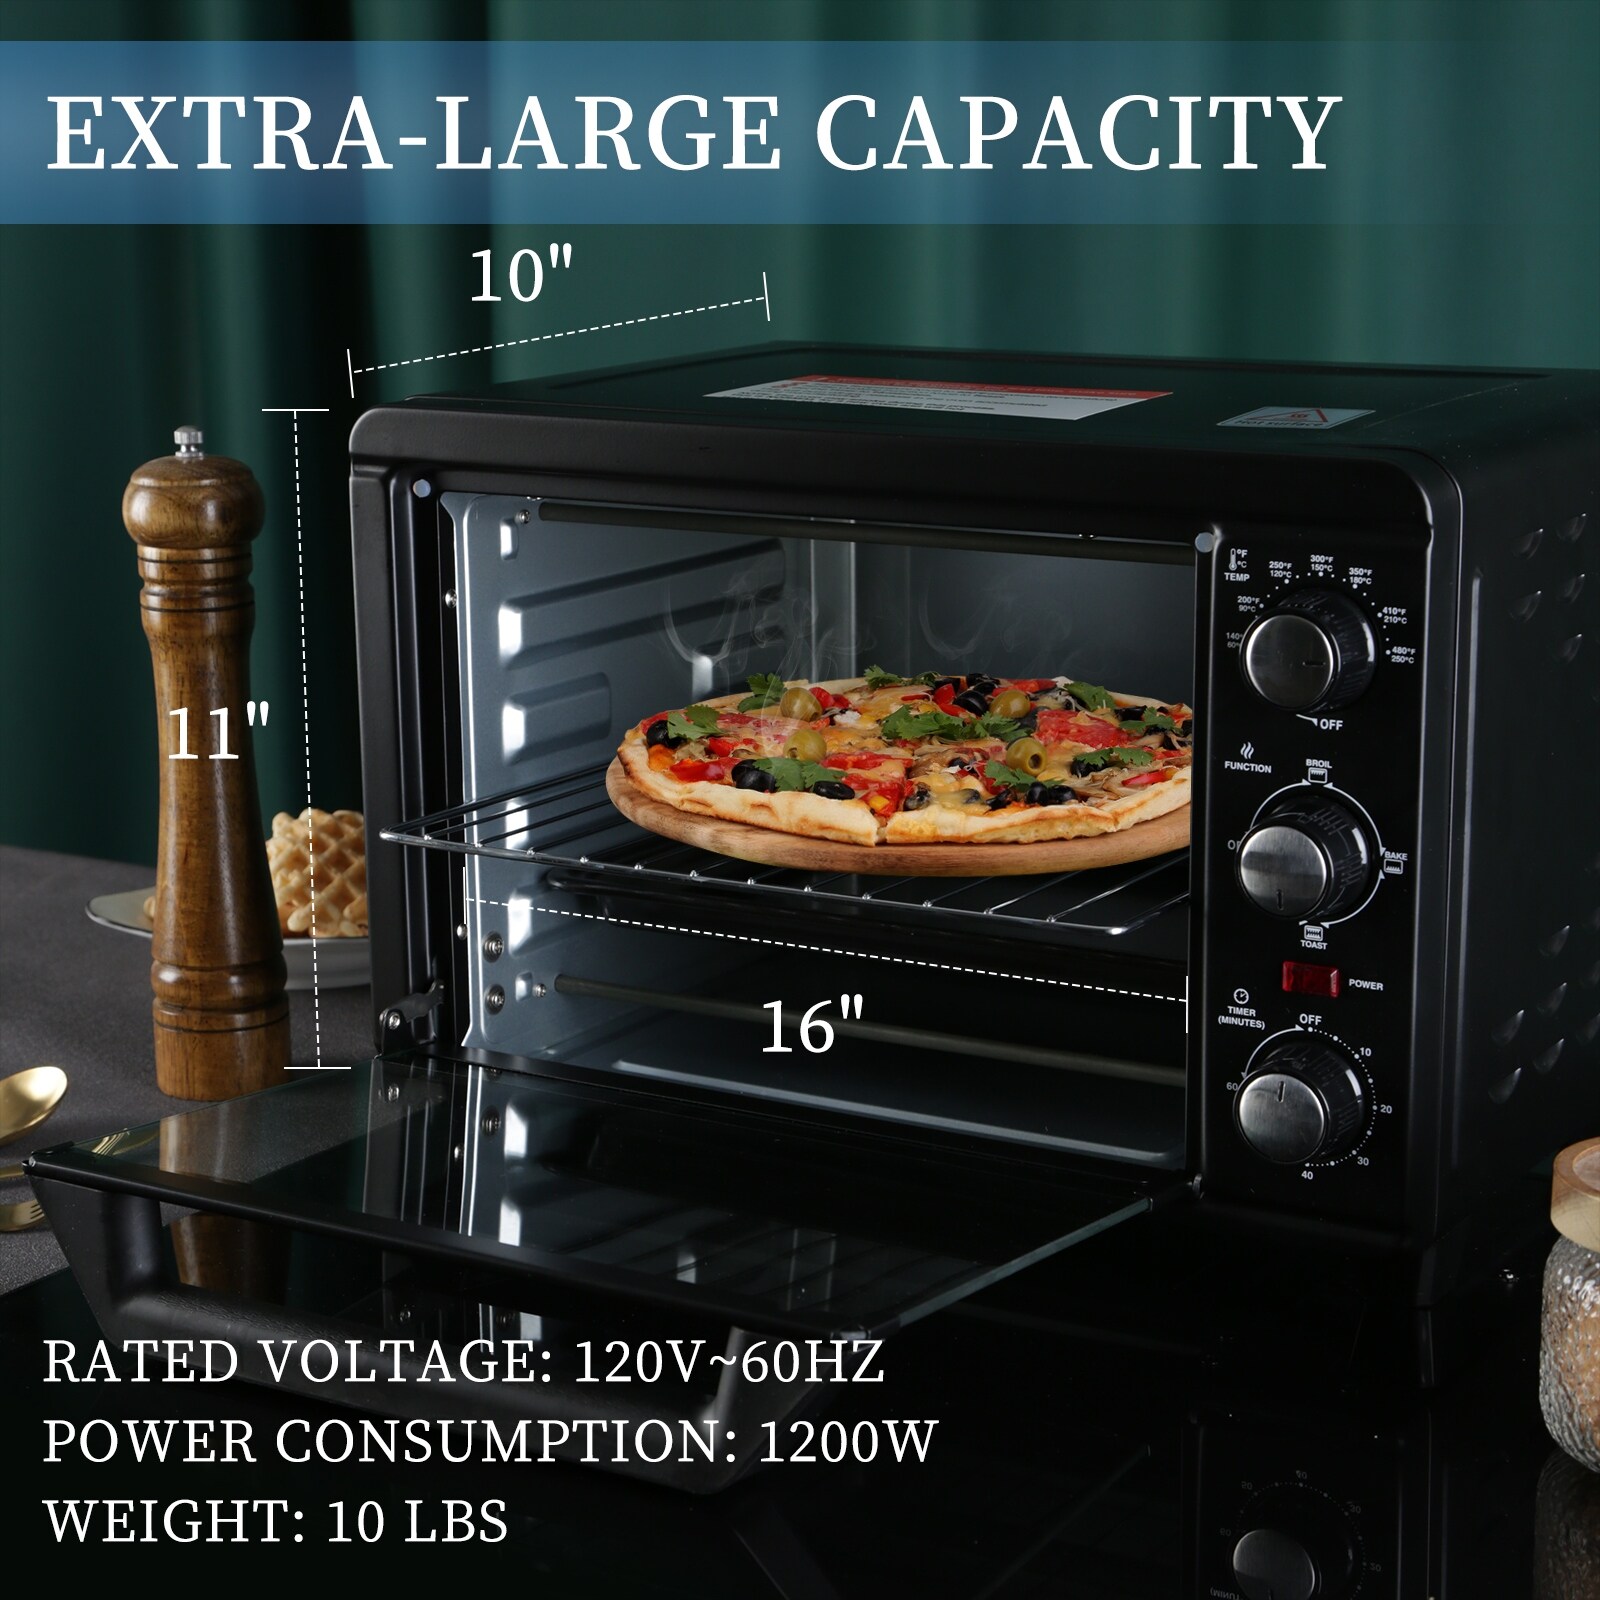 https://ak1.ostkcdn.com/images/products/is/images/direct/1c98073ab73b159ac1cdf962075dd99937093aaa/Toaster-Oven-with-20Litres-Capacity%2CCompact-Size-Countertop-Toaster%2C-Easy-to-Control-with-Timer-Bake-Broil-Toast-Setting.jpg